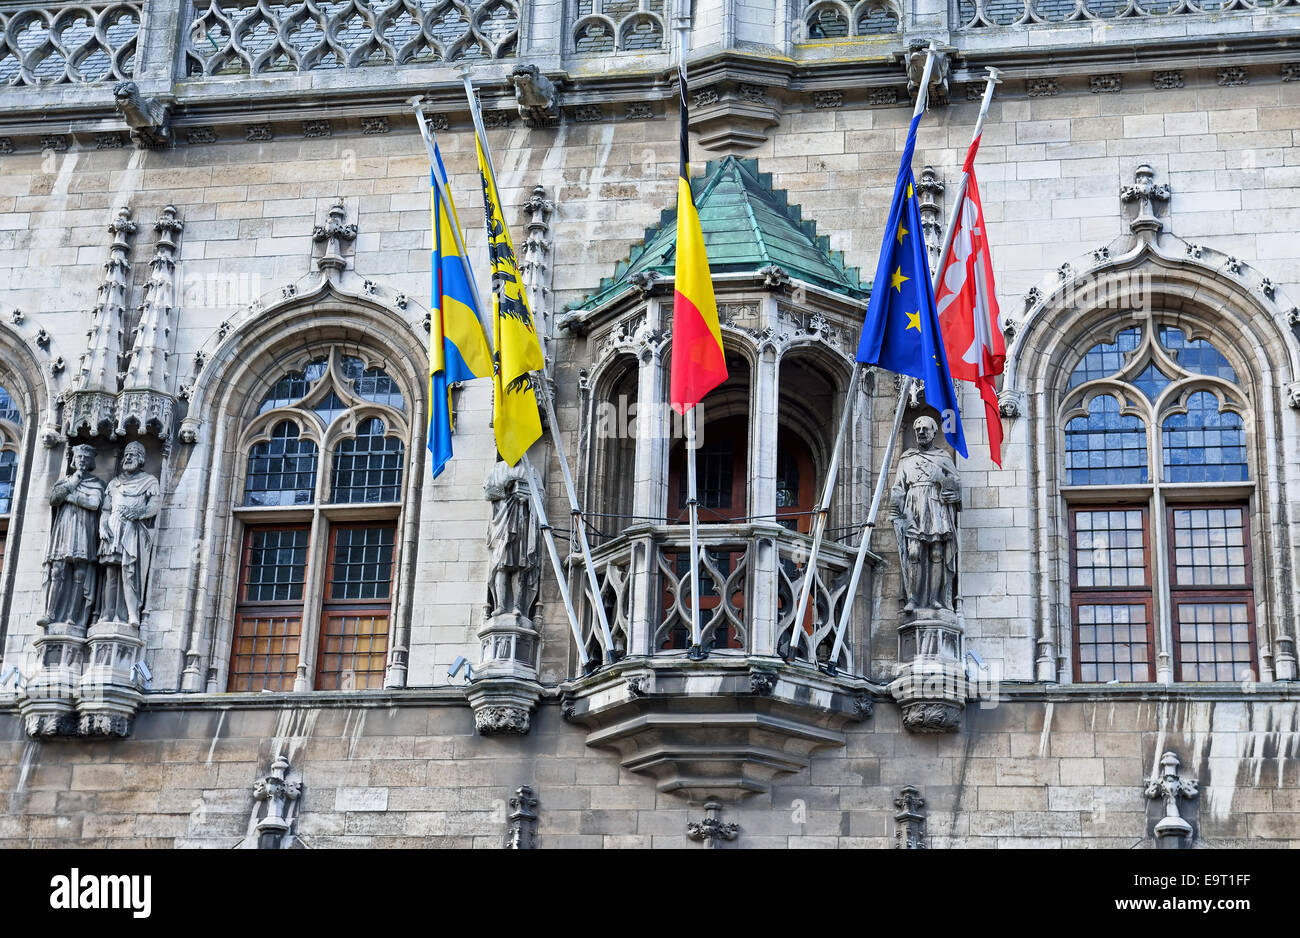 Medieval City Hall of Courtrai or Kortrijk, Belgium with flags of country and regions Stock Photo